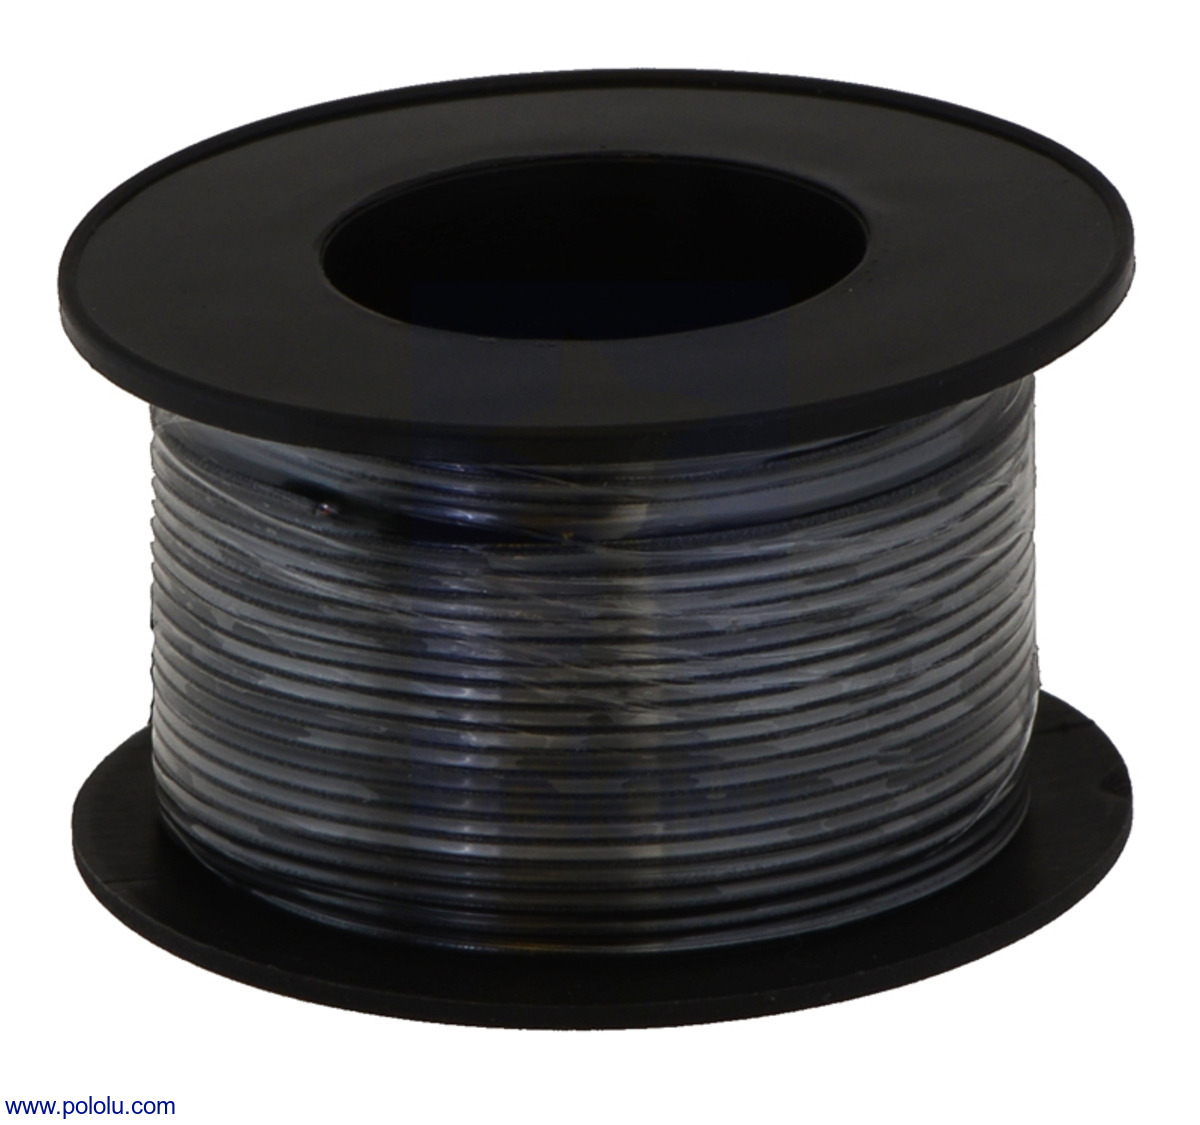 Fine Strand Tinned Copper 50 ft Black 24 AWG Gauge Silicone Wire Spool 